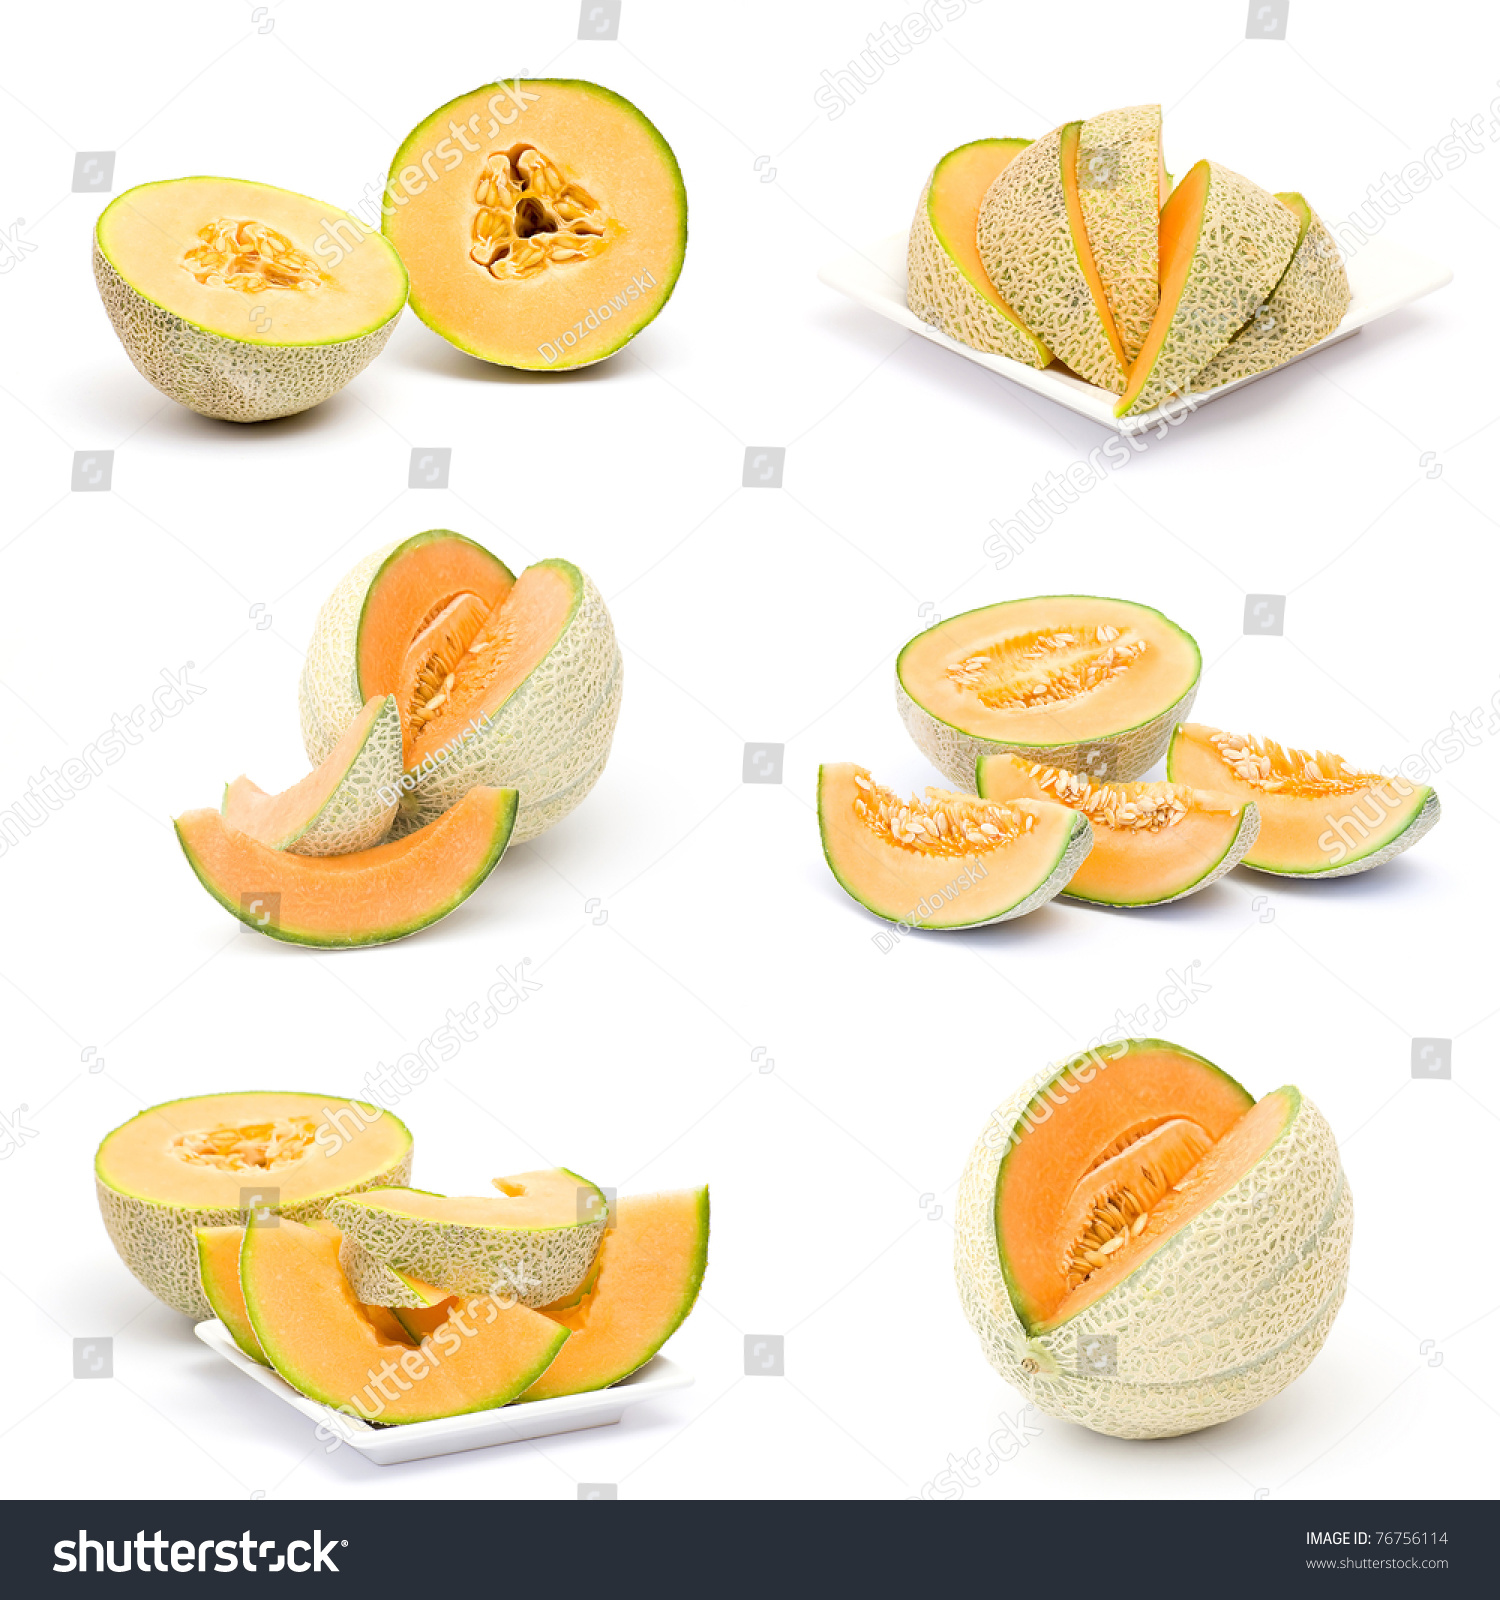 Collection Fresh Melon Fruits Stock Photo 76756114 - Shutterstock